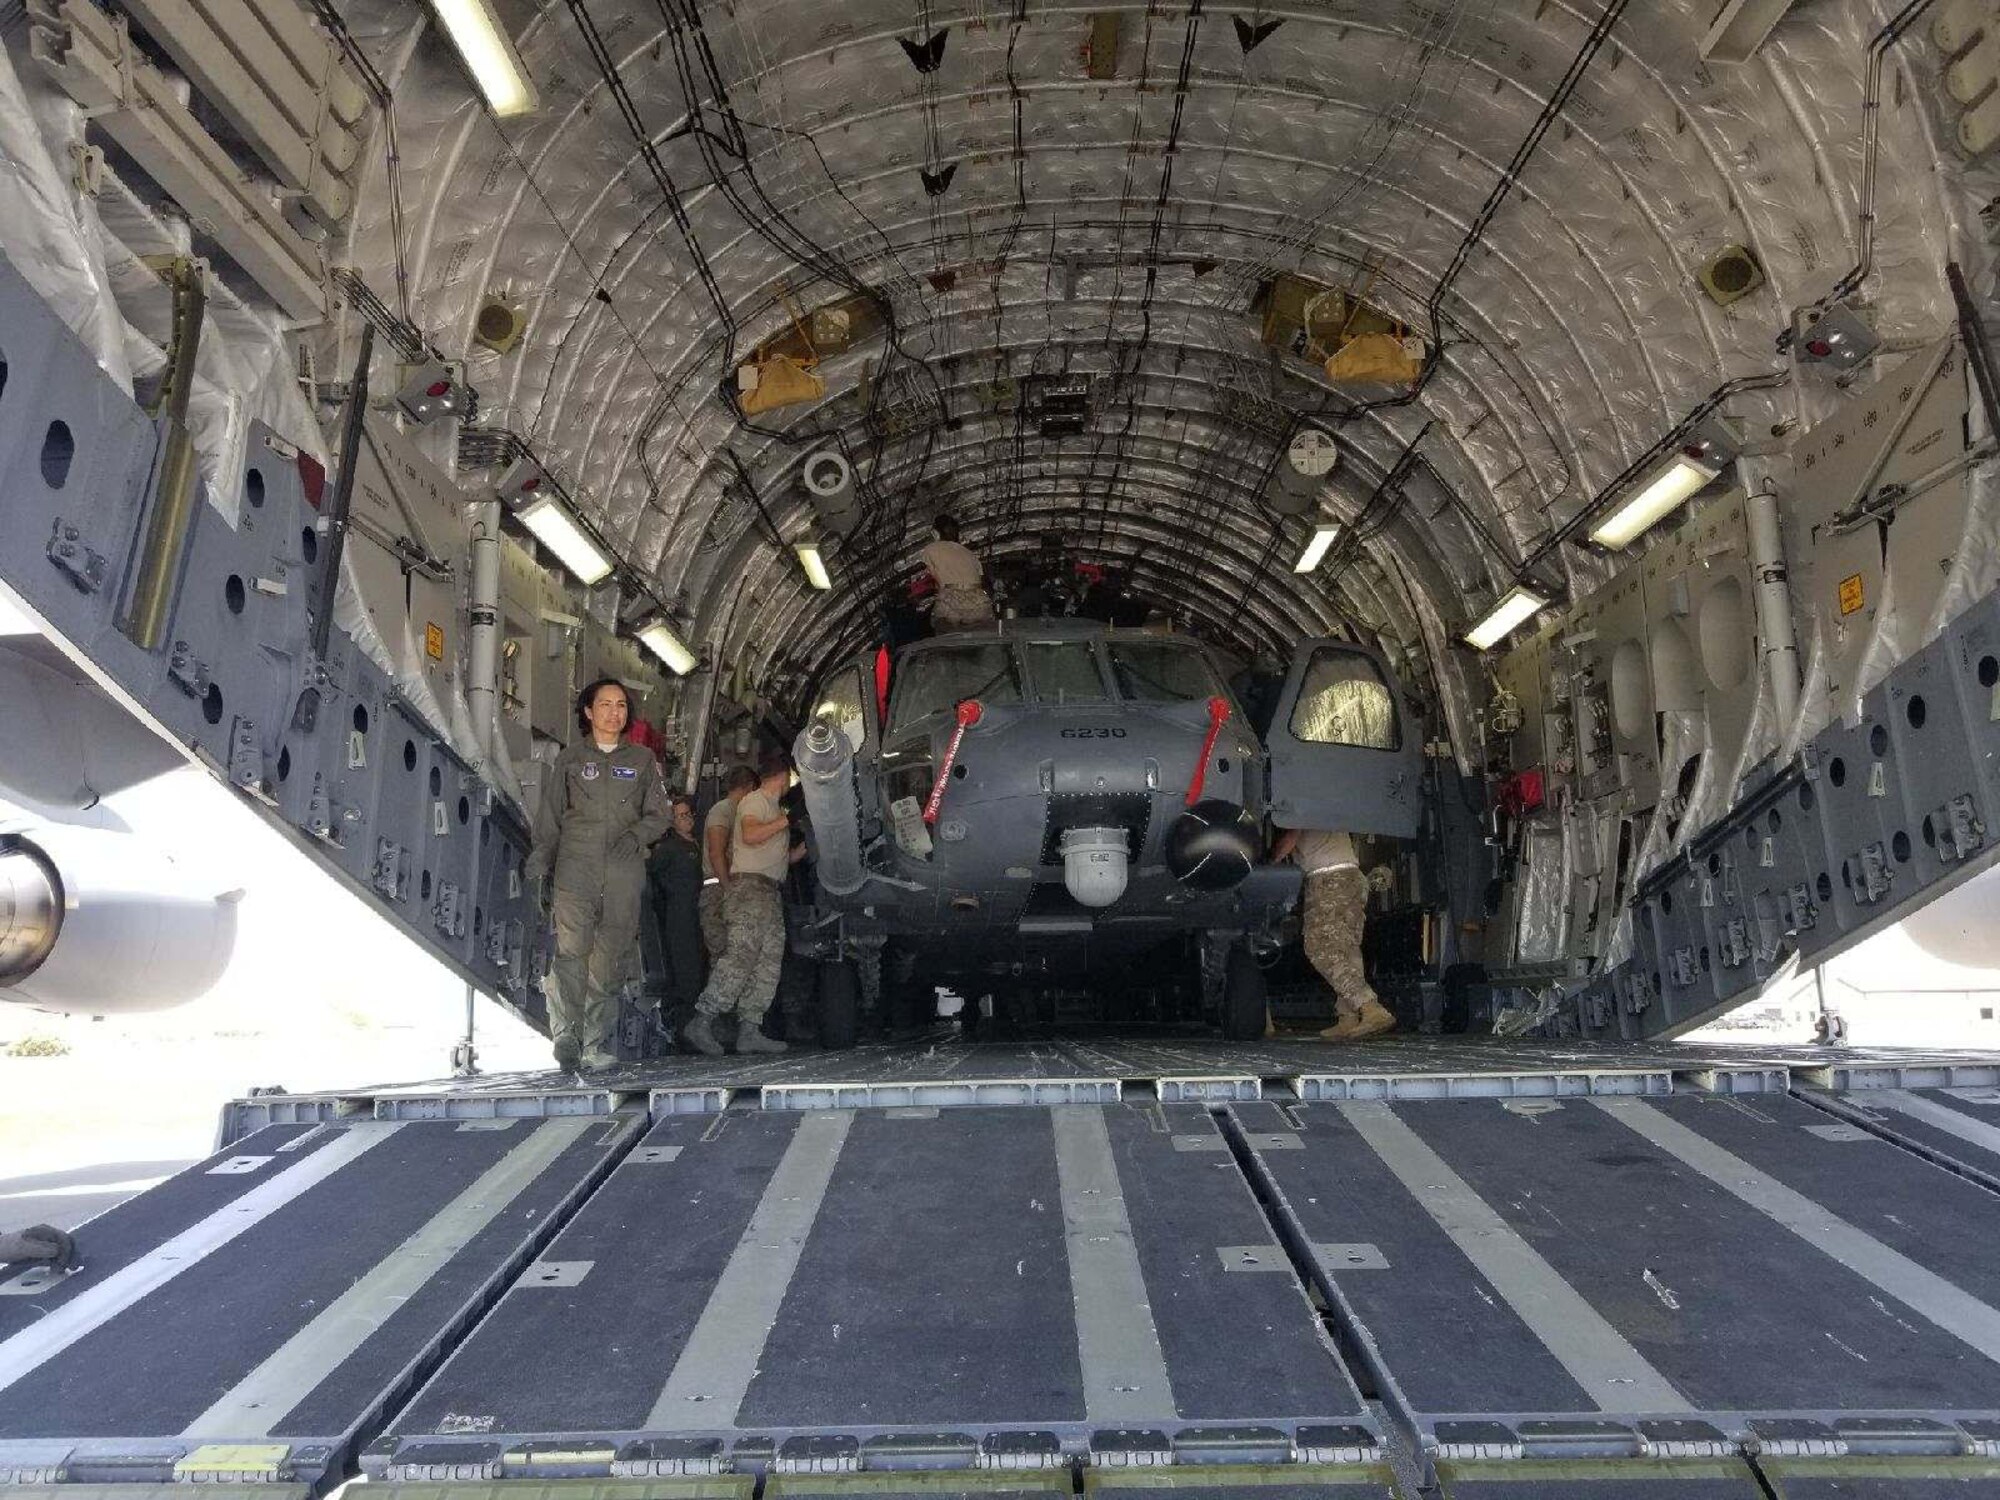 Reserve Citizen Airmen from the 920th Aircraft Maintenance Squadron at Patrick AFB, Fla. load an HH-60G Pave Hawk onto a C-17 as part of Red Flag-Rescue 18-2 near Davis-Monthan Air Force Base, Ariz., on May 3, 2018. Red Flag-Rescue gives joint service personnel an opportunity to build fundamental combat search and rescue skills to fight in and out of contested environments. (U.S. Air Force photo by Capt. Jonathan Foster)